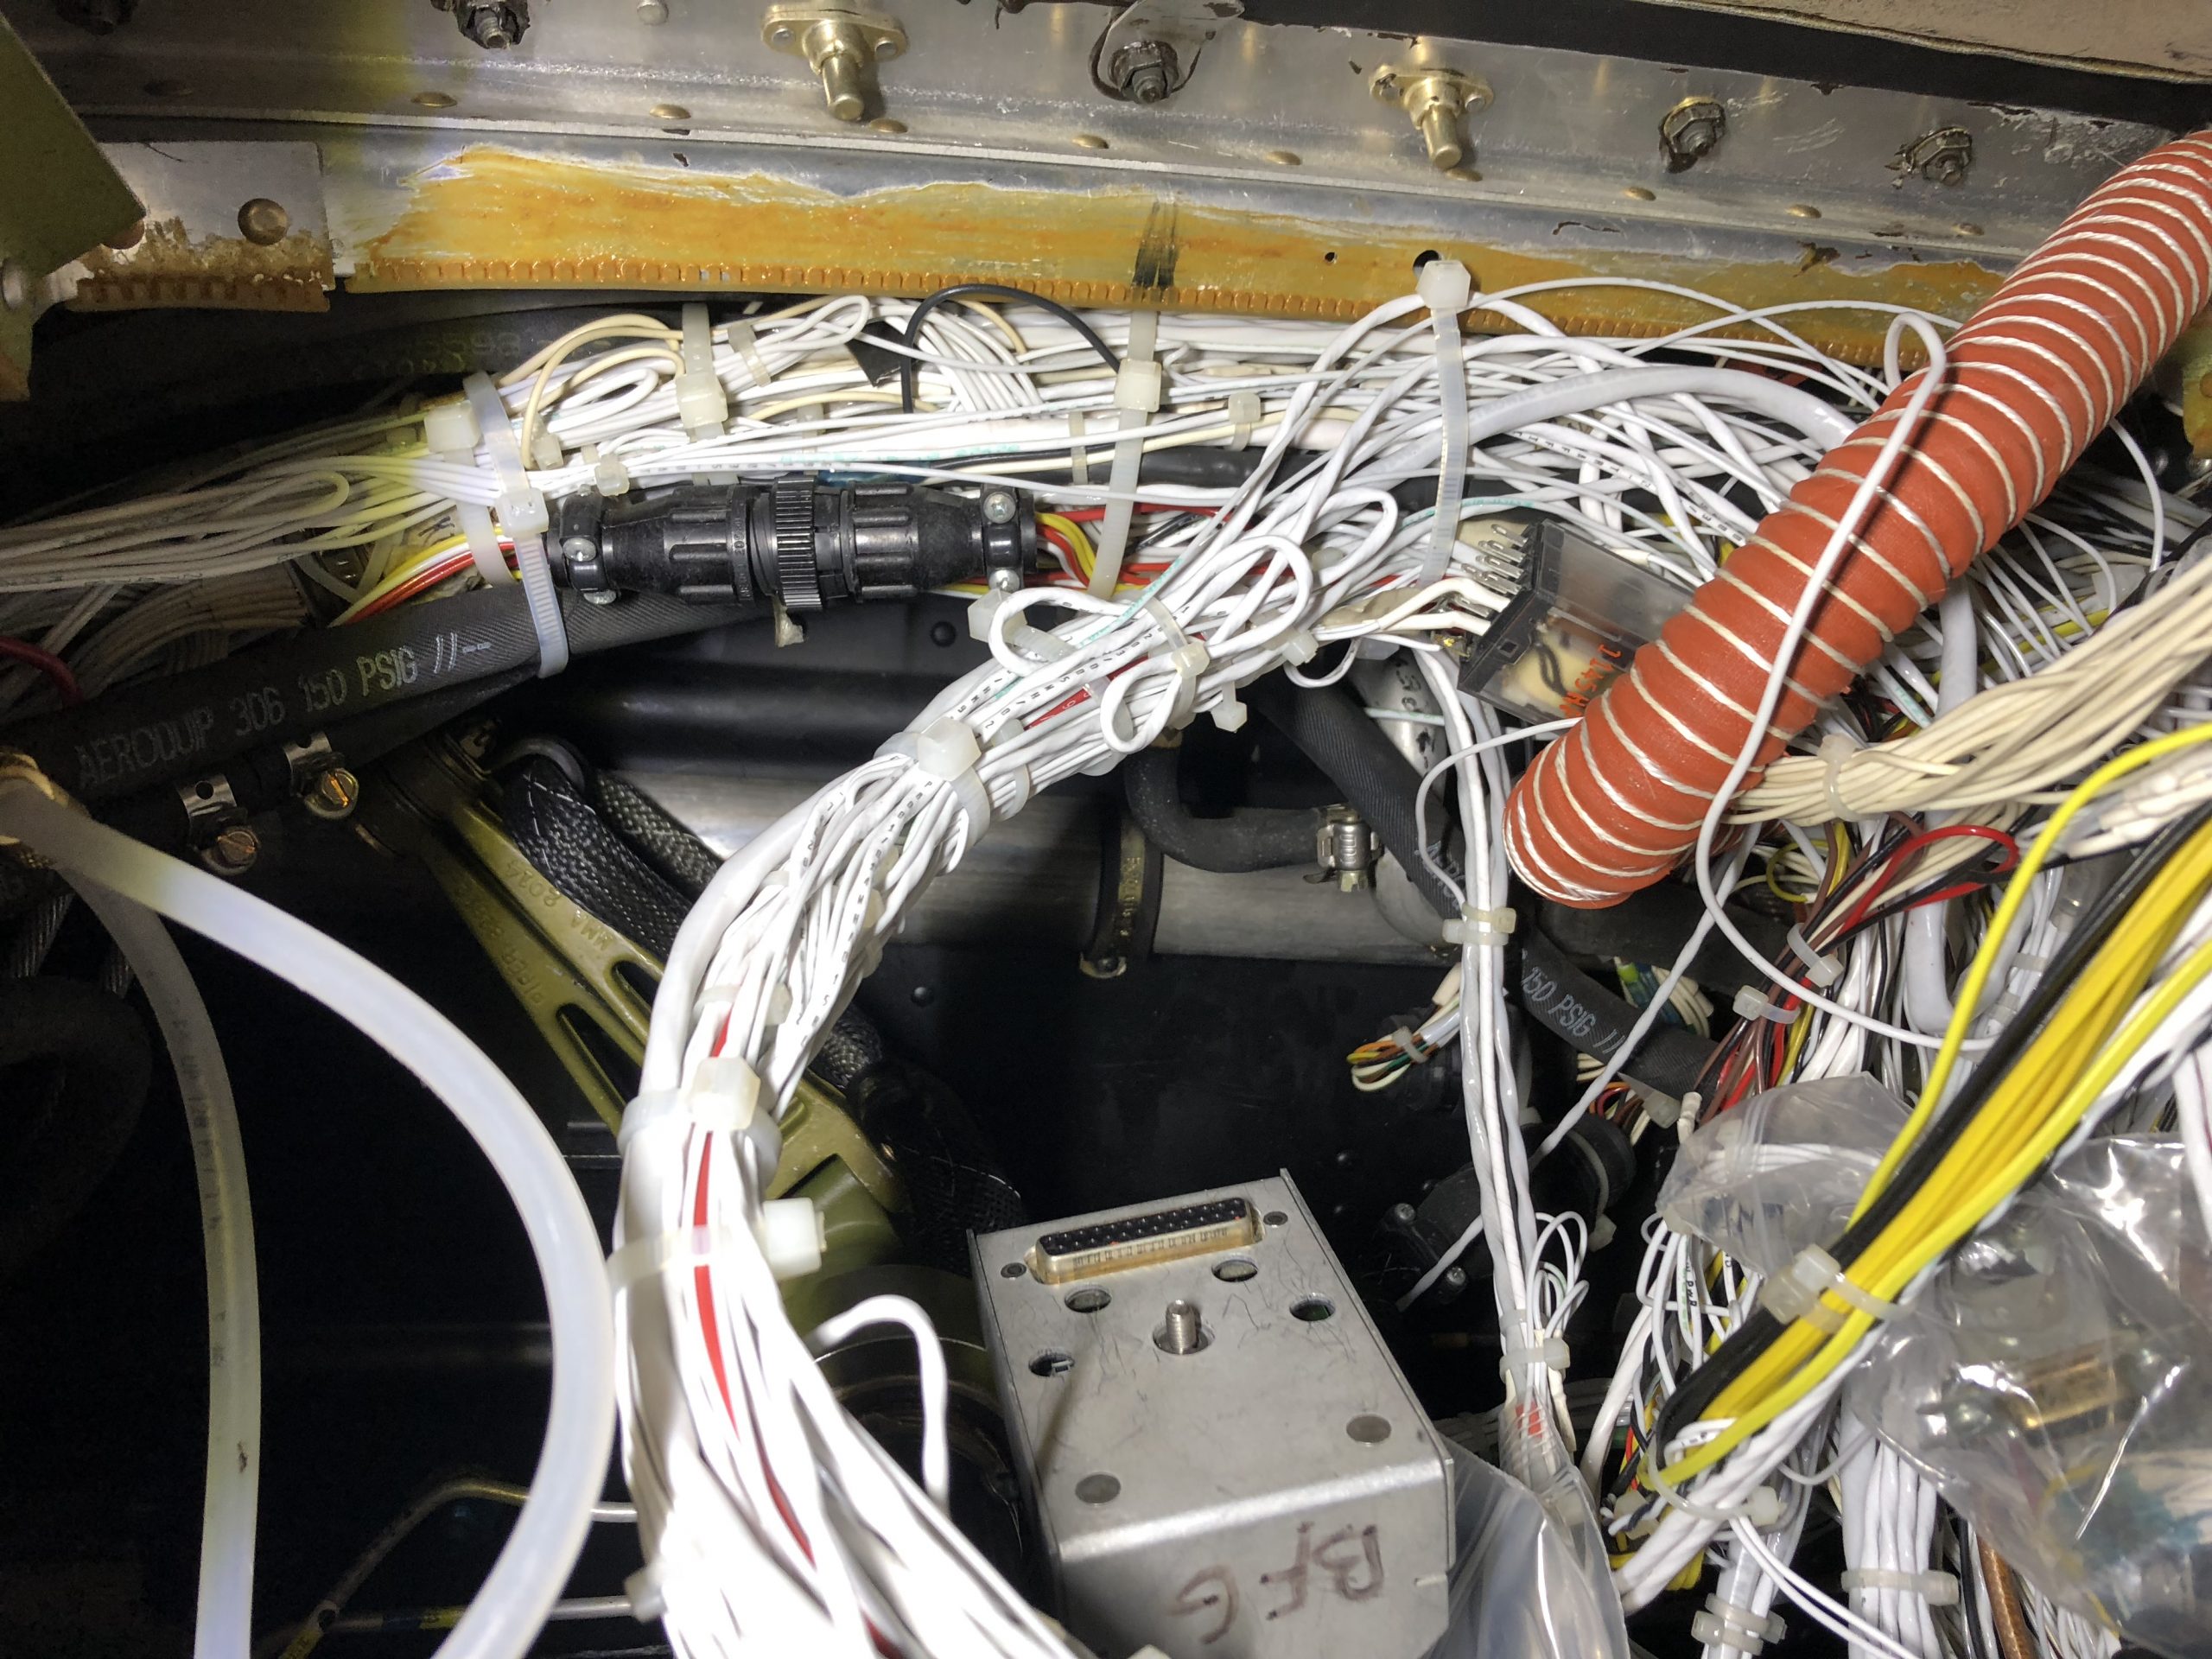 An Example of One of the Poorly Made Wiring Bundles